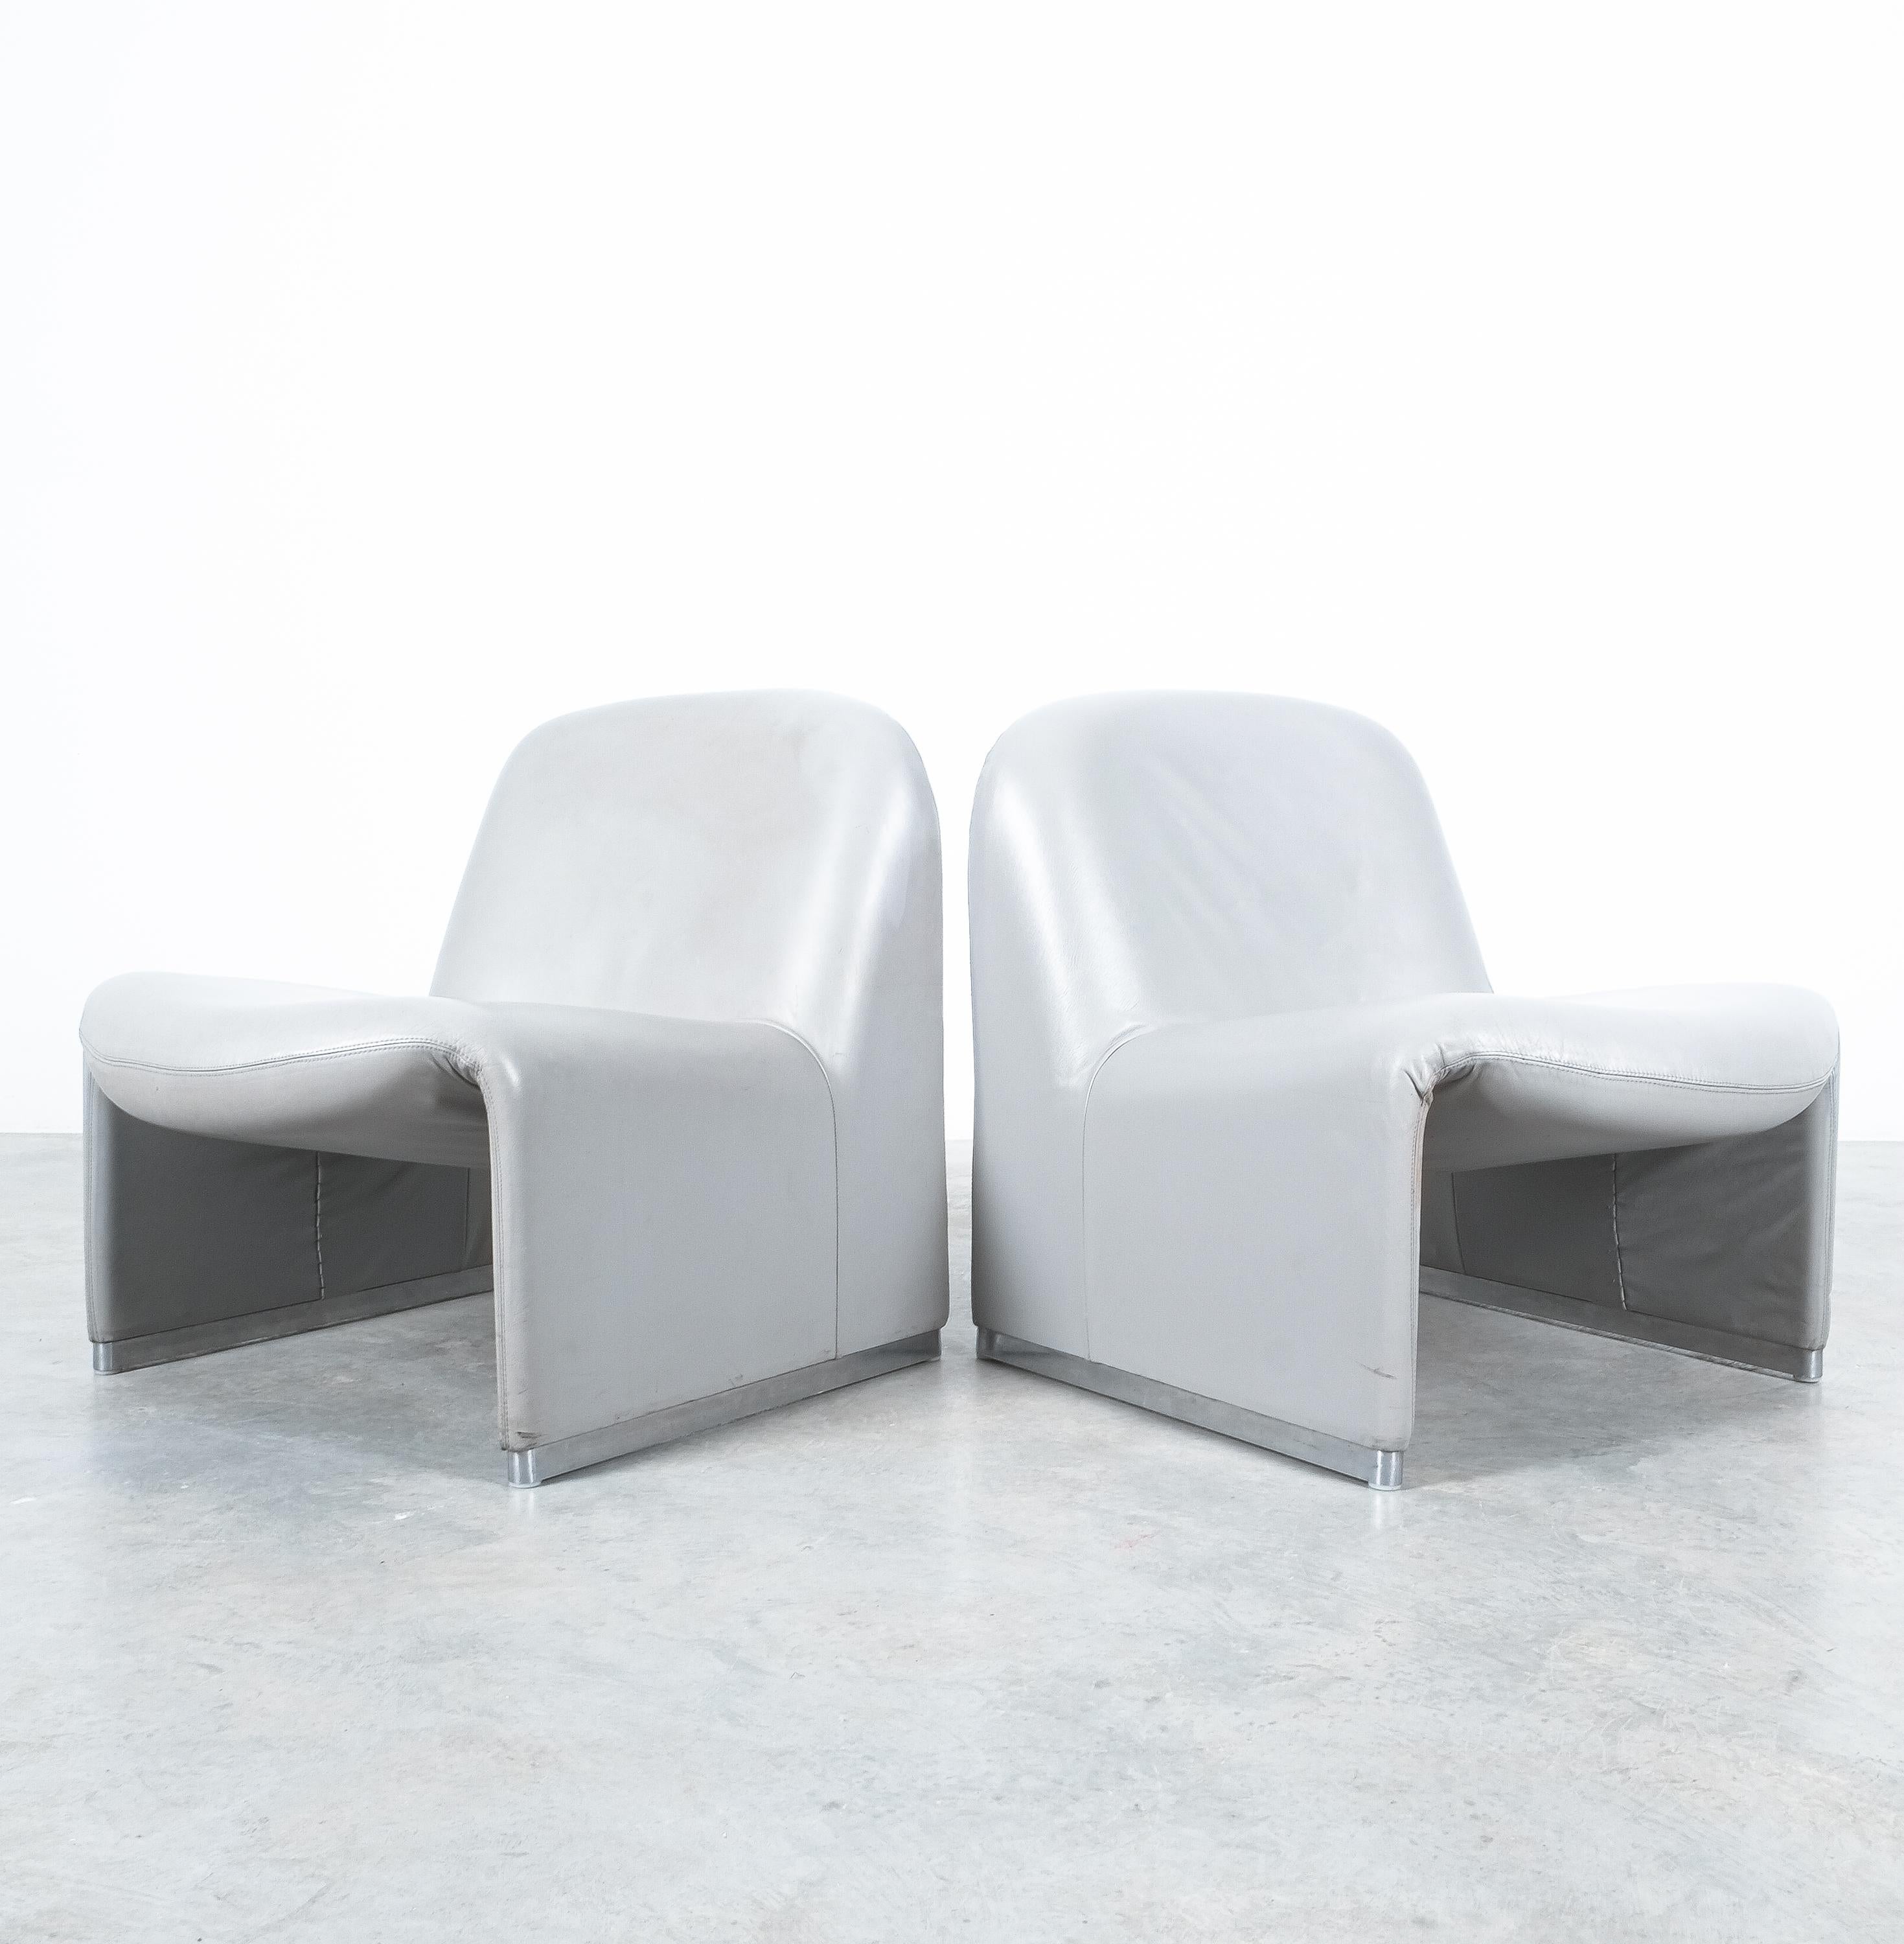 A pair of Giancarlo Piretti “Alky” lounge chairs originally upholstered with grey leather, manufactured by Castelli in the 1970s.

Great original condition with the foam still being intact and exactly the right amount of sturdiness, the organic